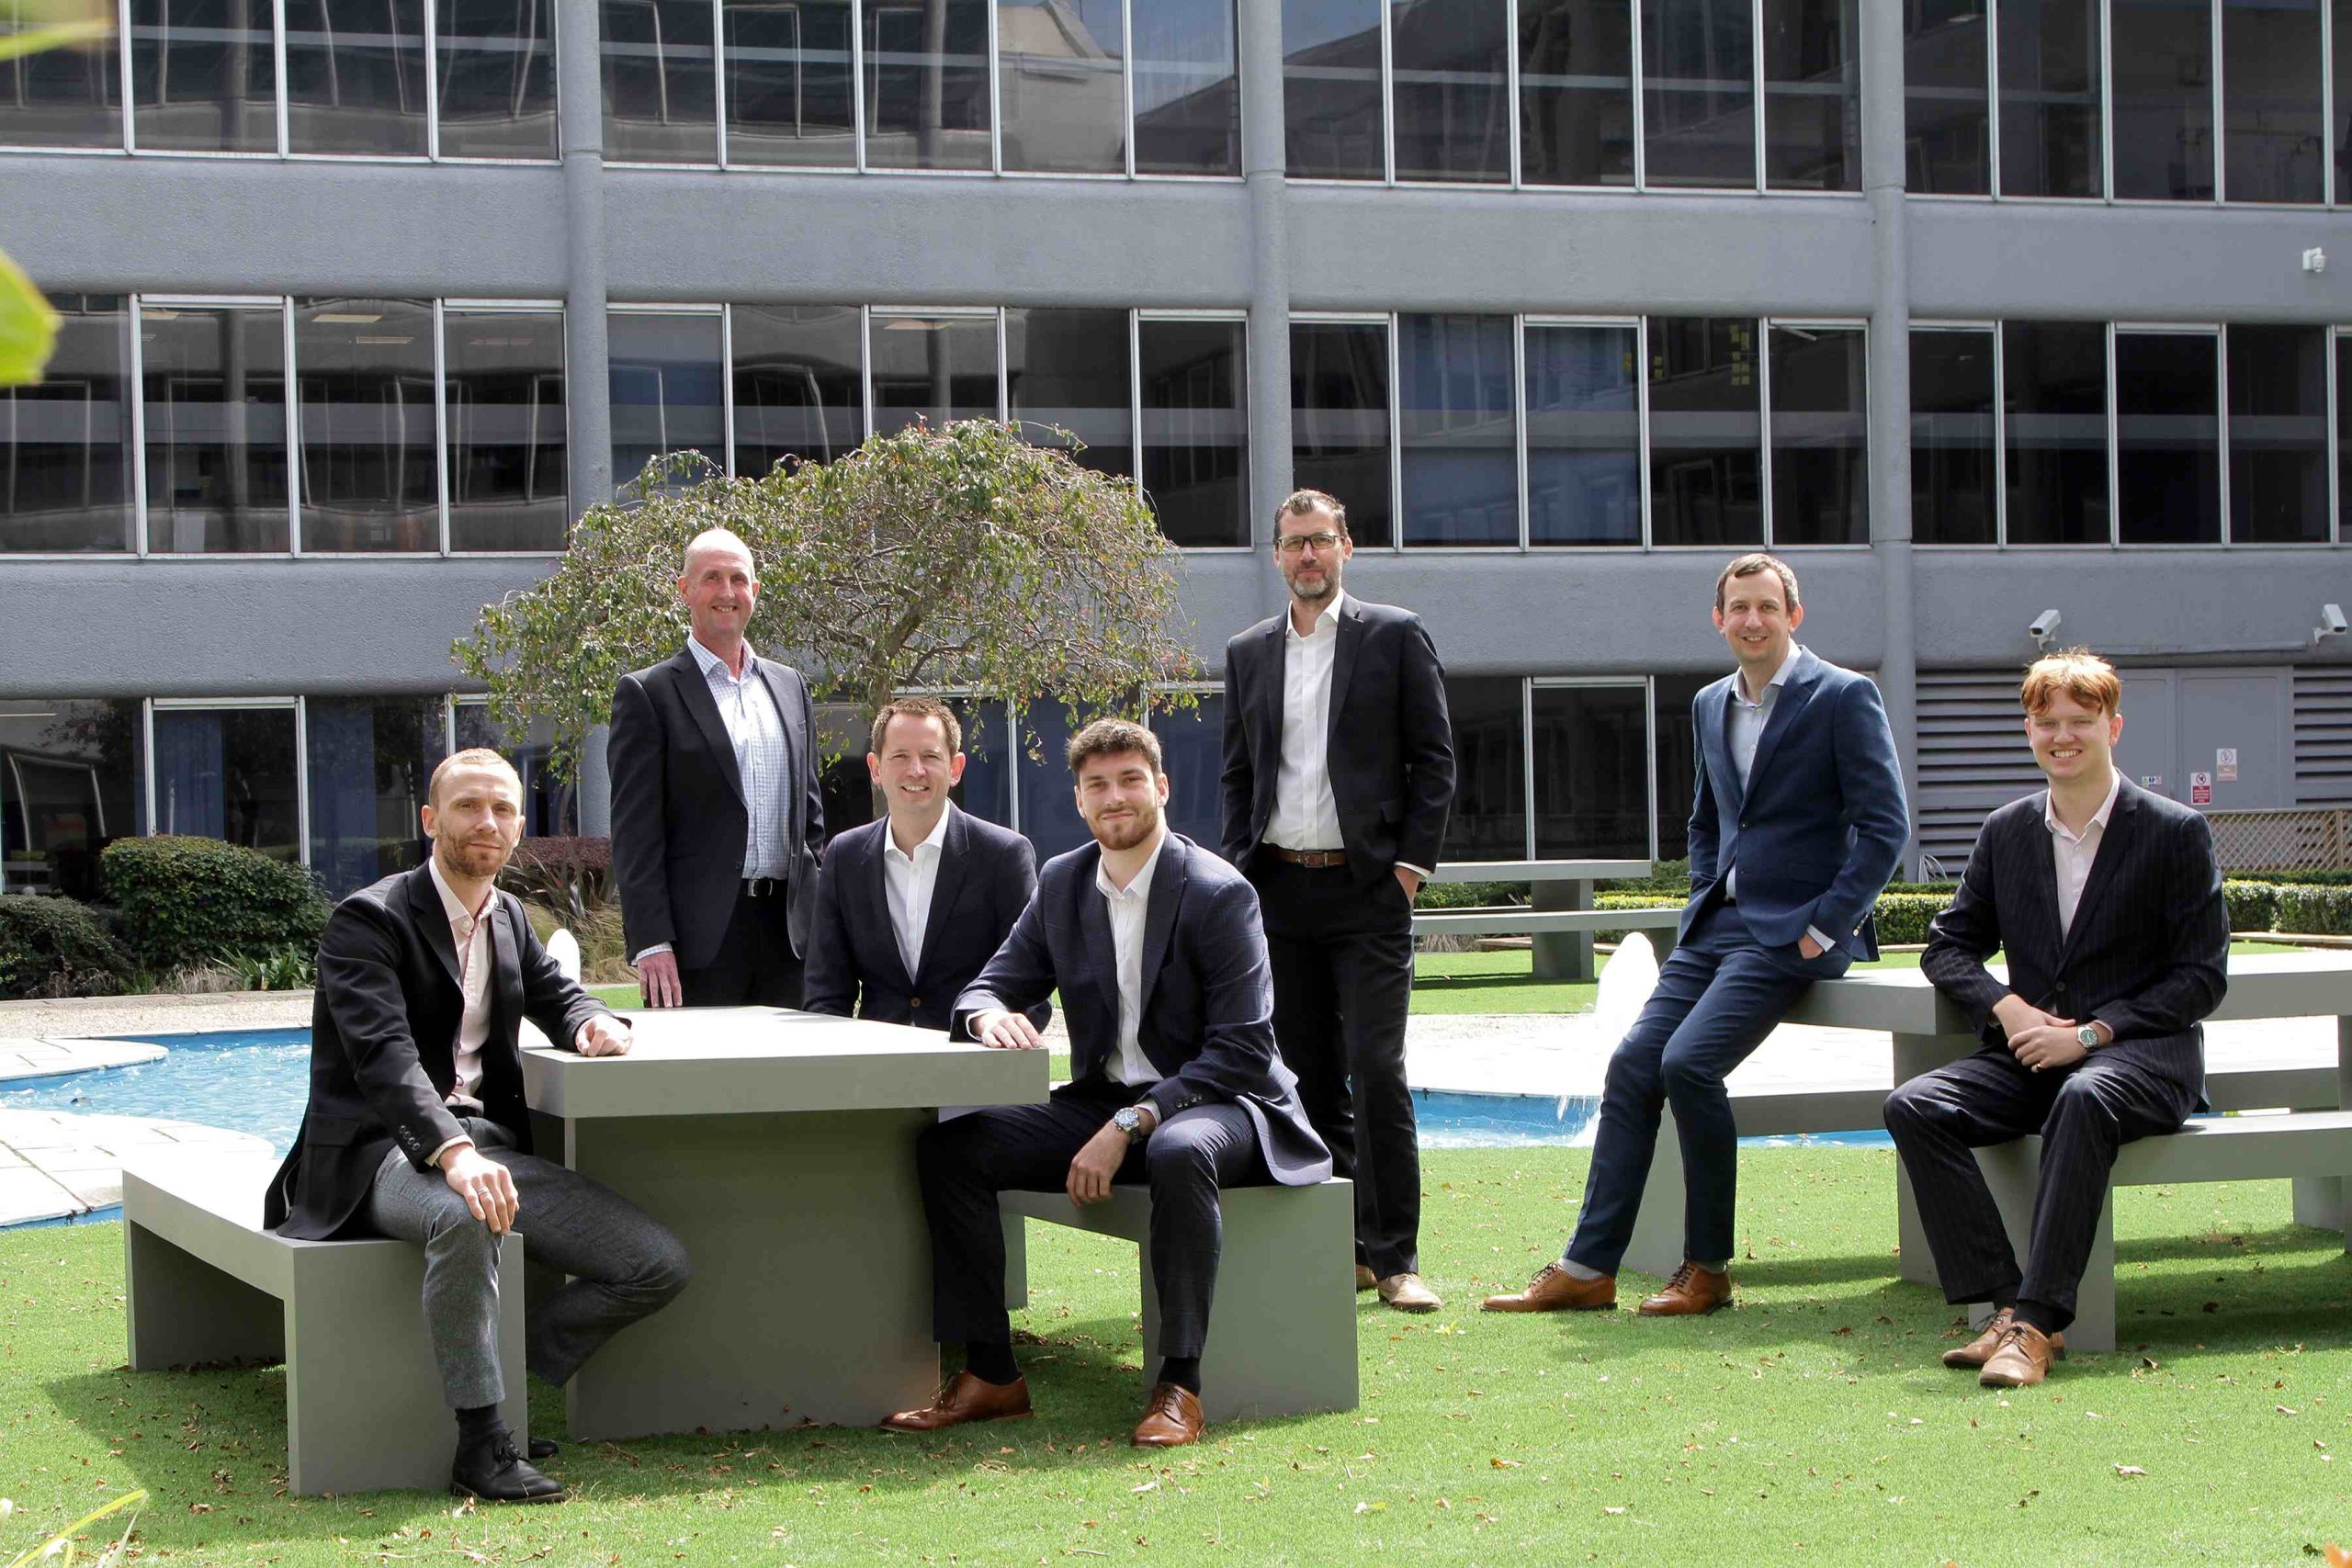 7 males in suits sat around benches in an office garden, representing the team at FHP Property Consultants